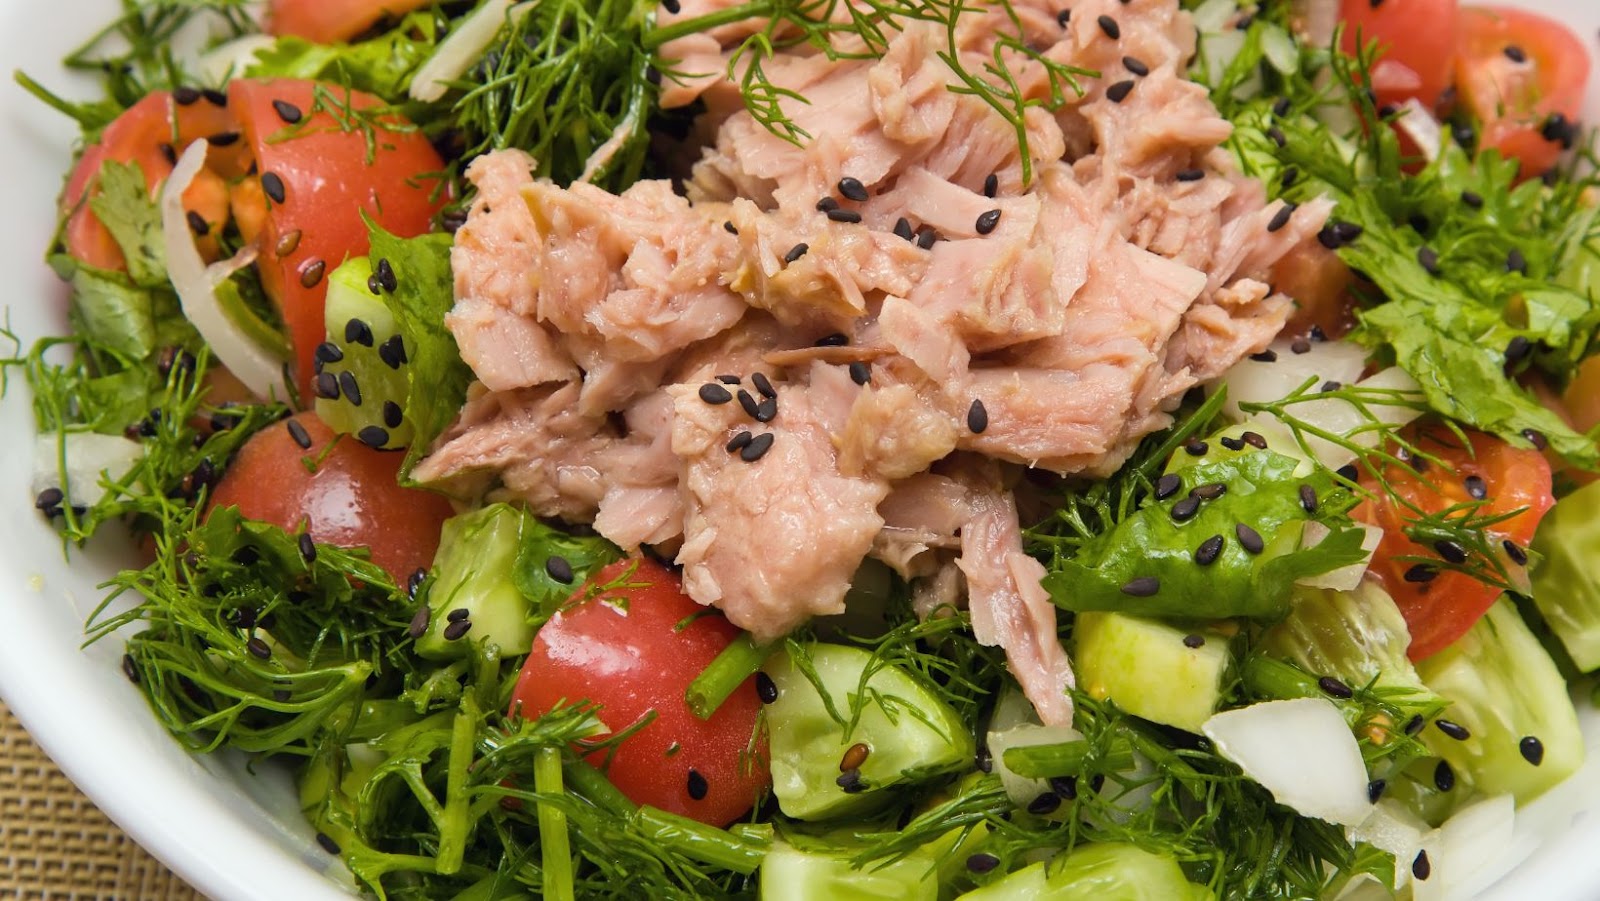 Is Tuna Salad Safe for Dogs